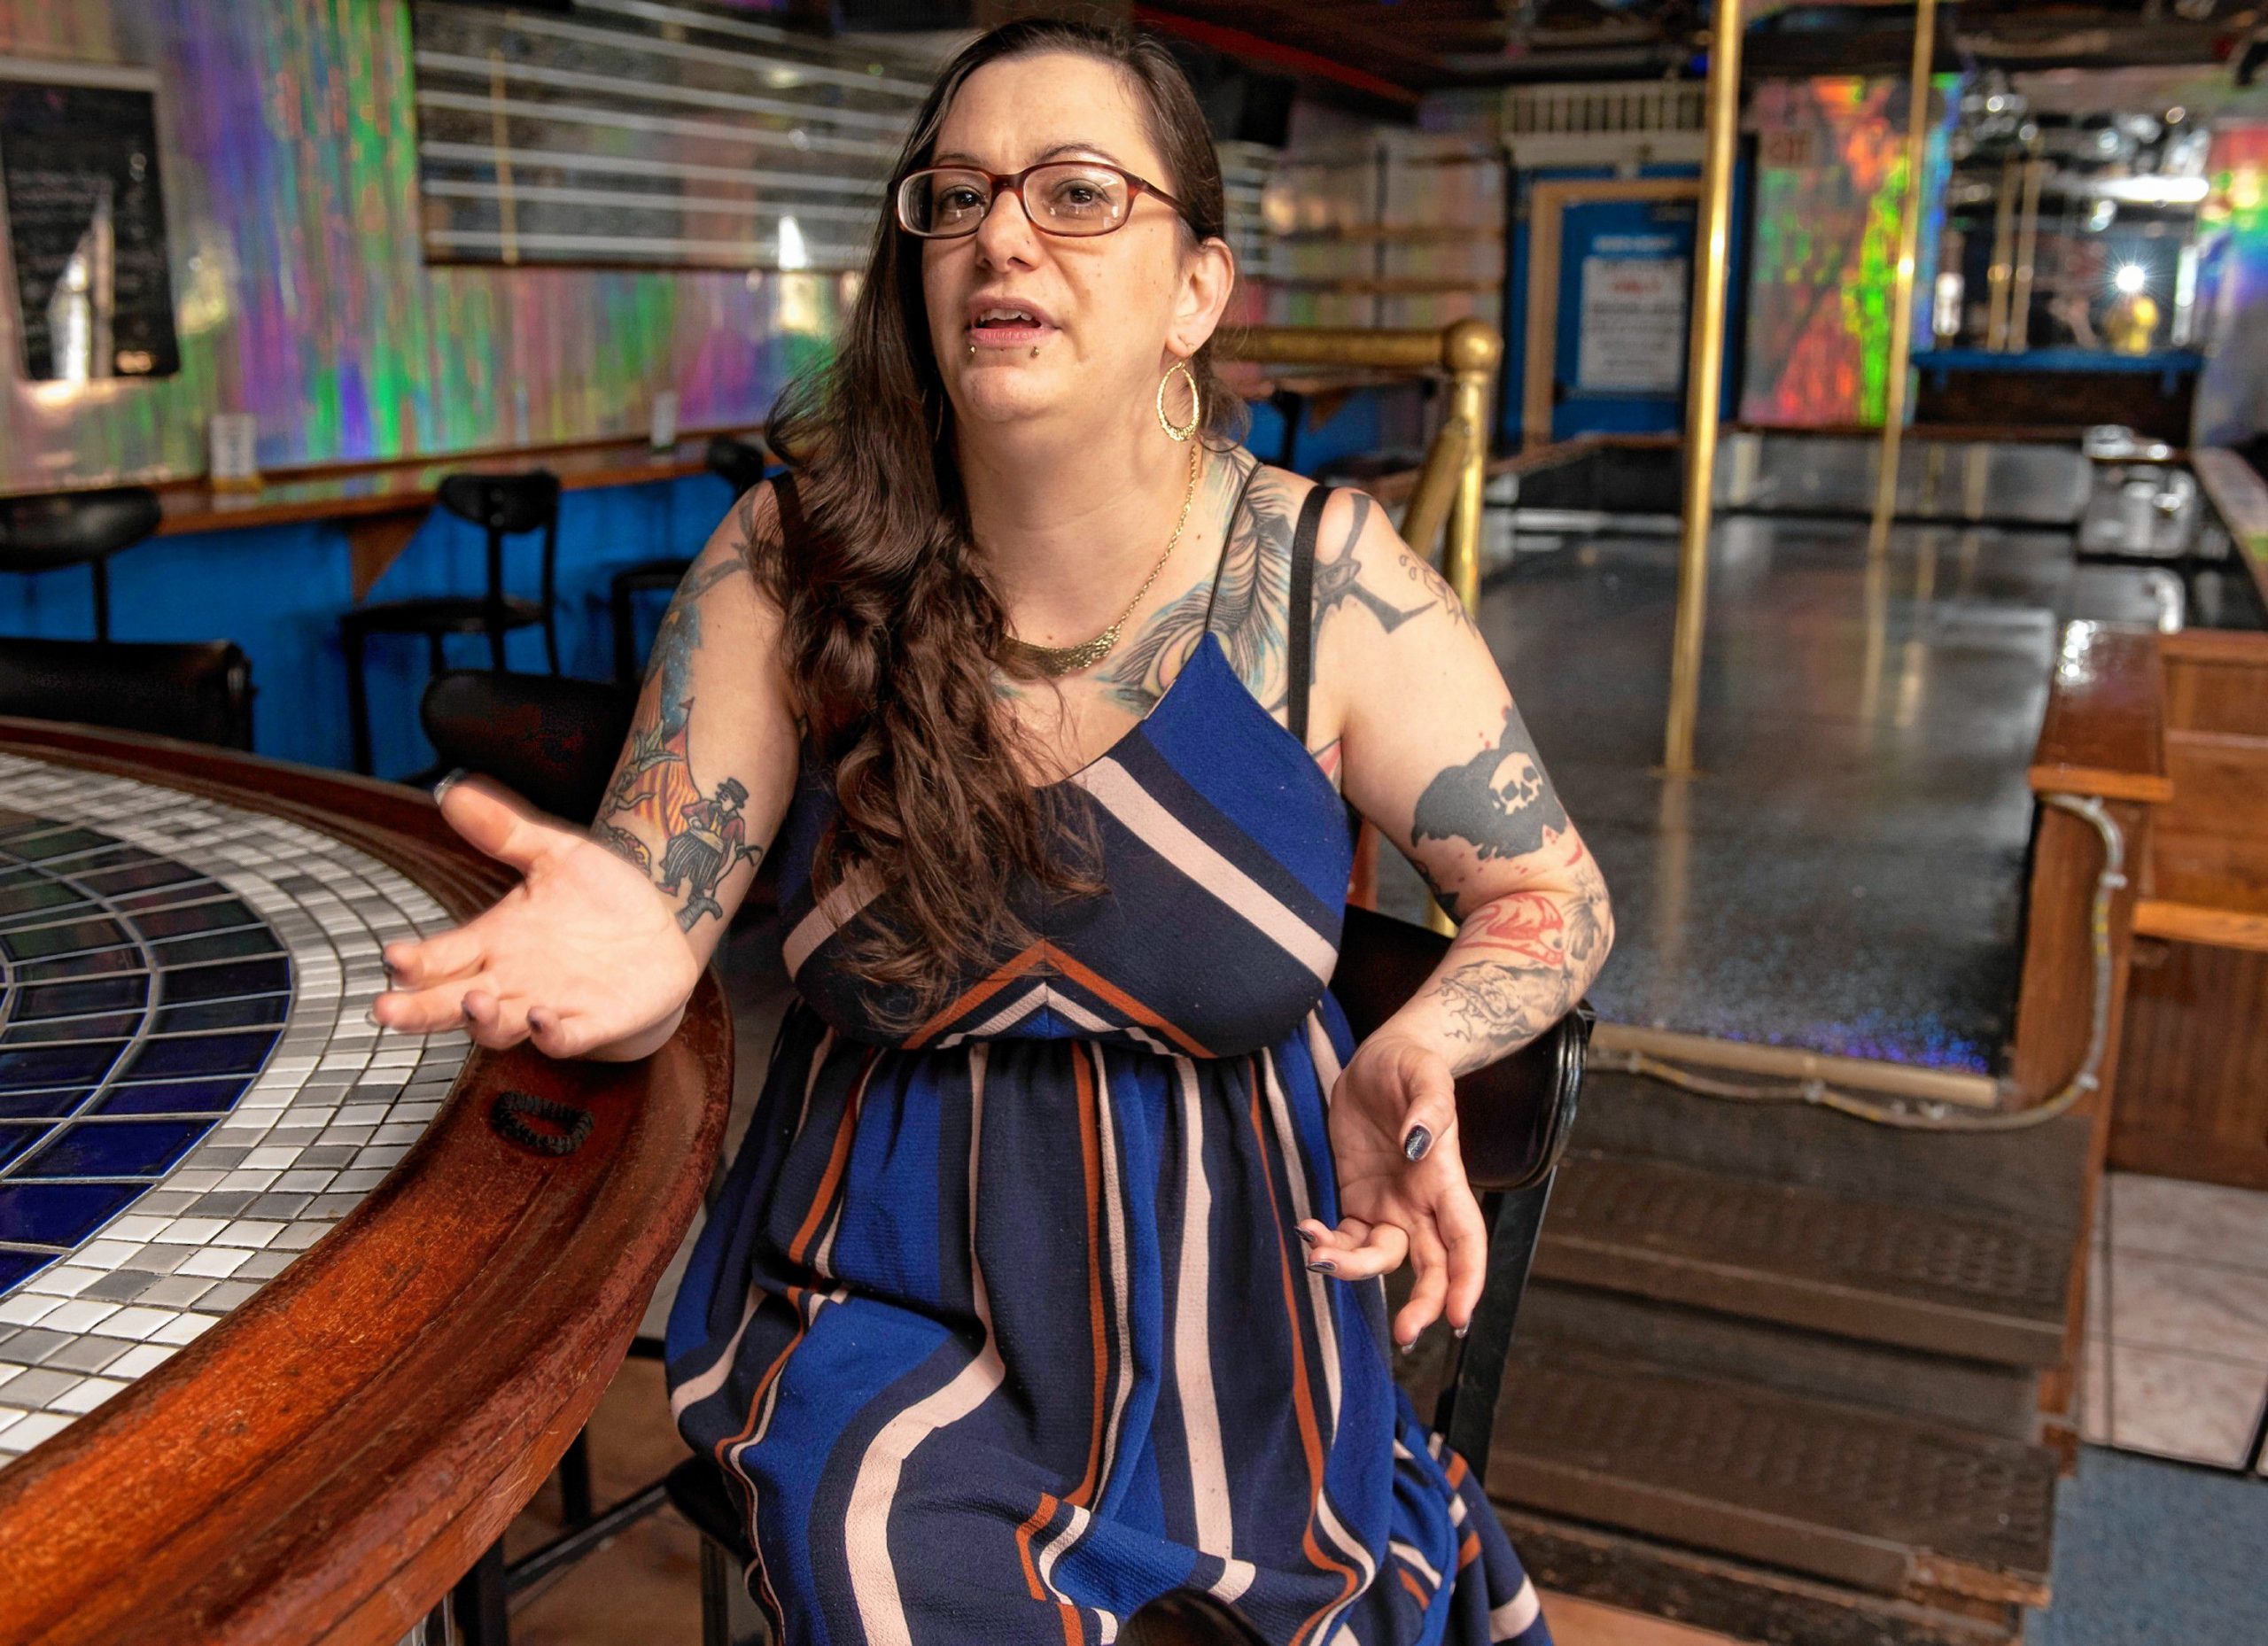 Former Club Castaway manager says she quit following dispute over queer per...